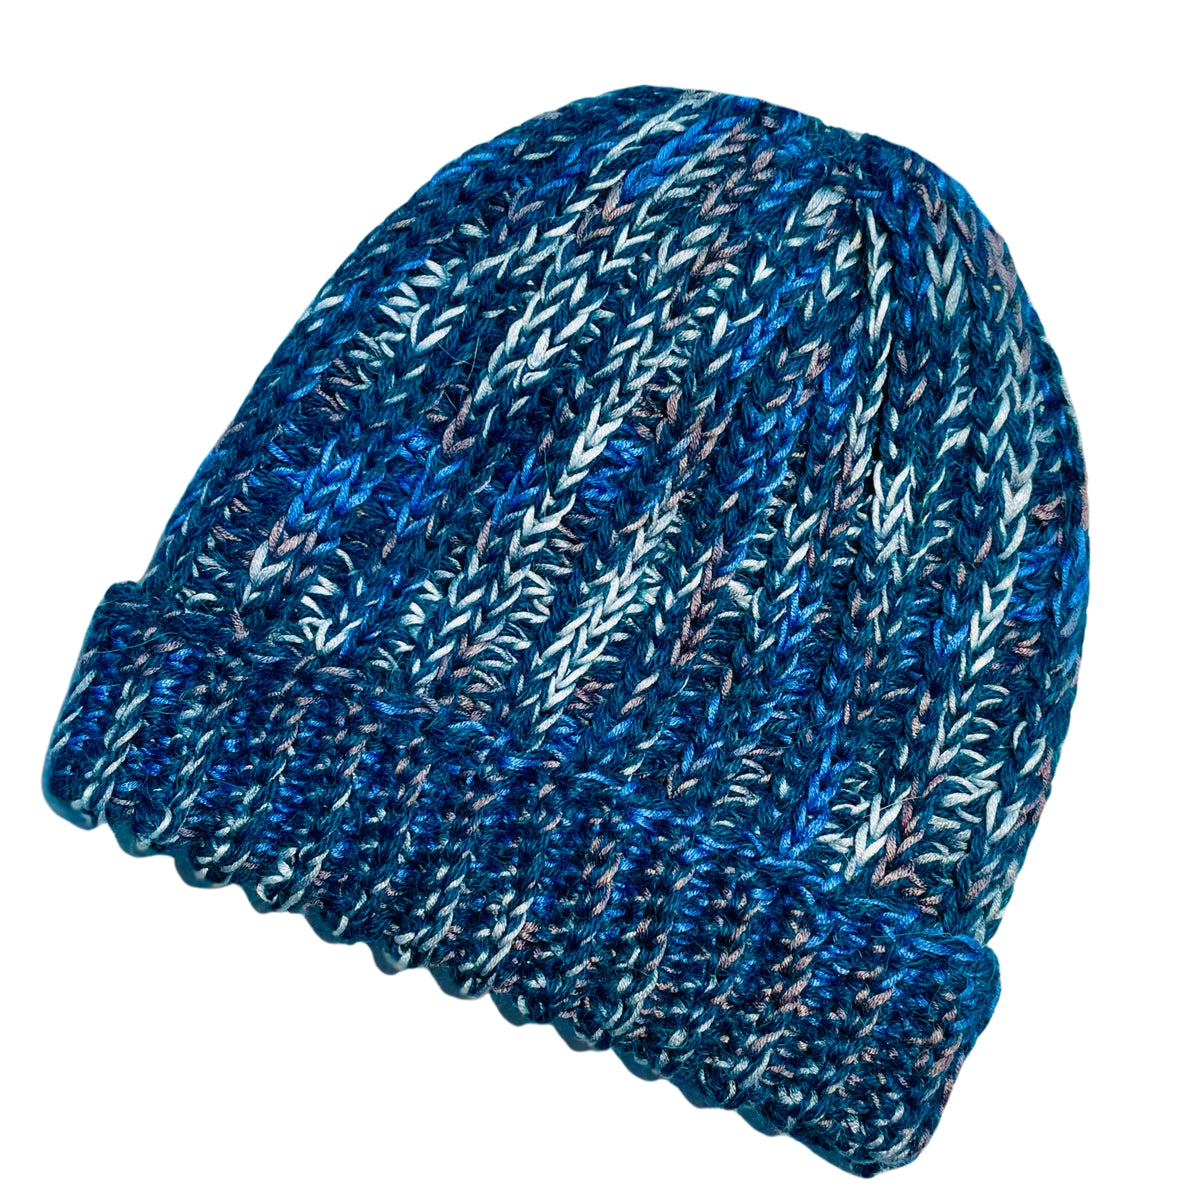 Ocean blue, dark turquoise, cobalt, cerulean, gray, and white colored cozy soft warm handmade knitted crochet ridge ribbed hat made in Montana by Alpacas of Montana.